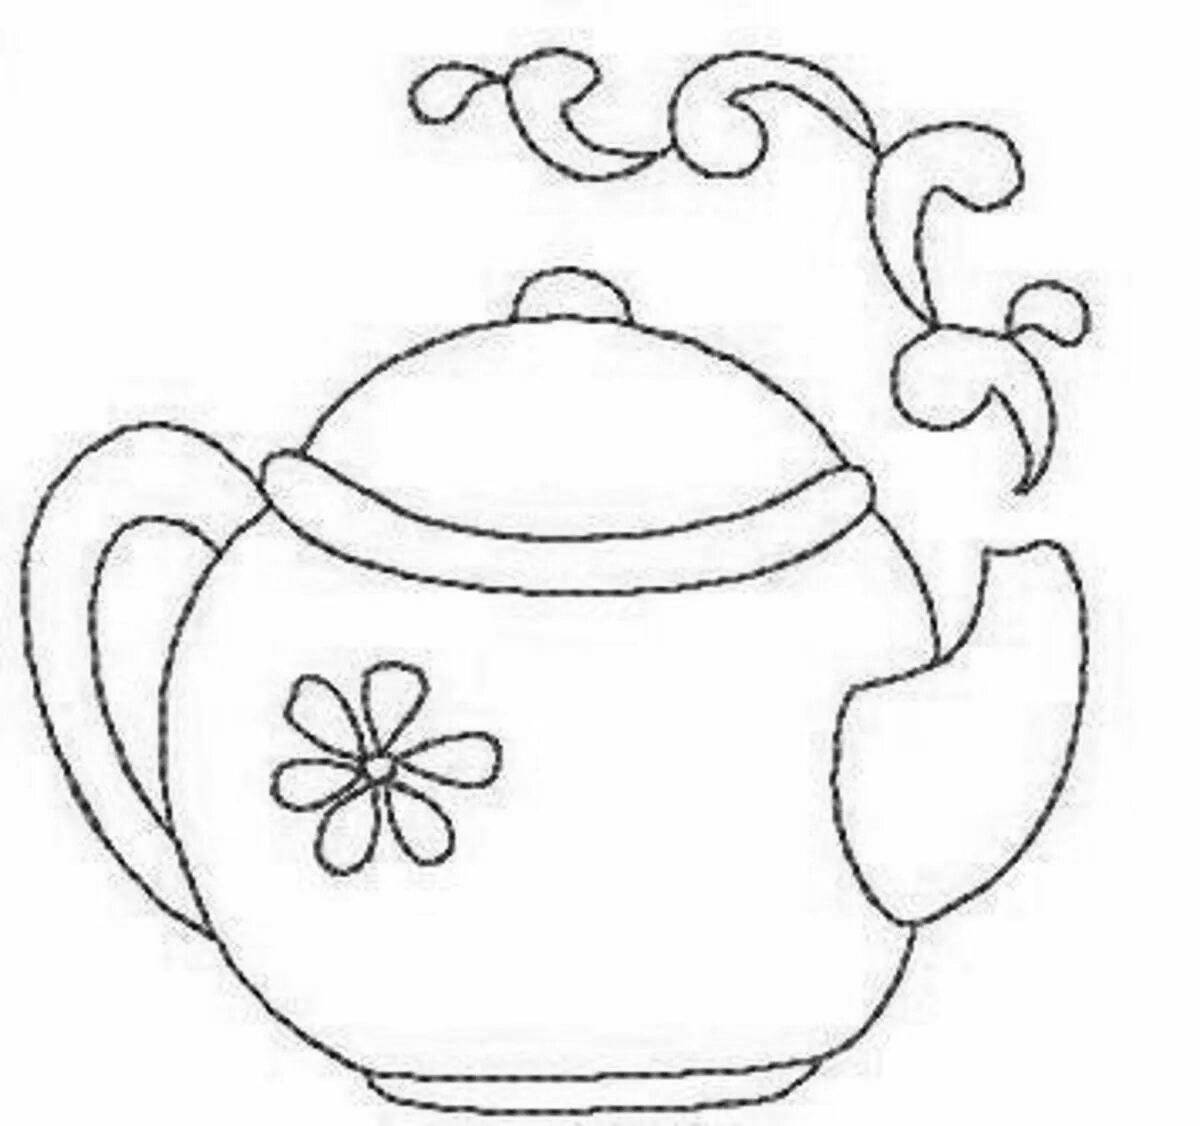 Blissful teapot coloring page for 2-3 year olds